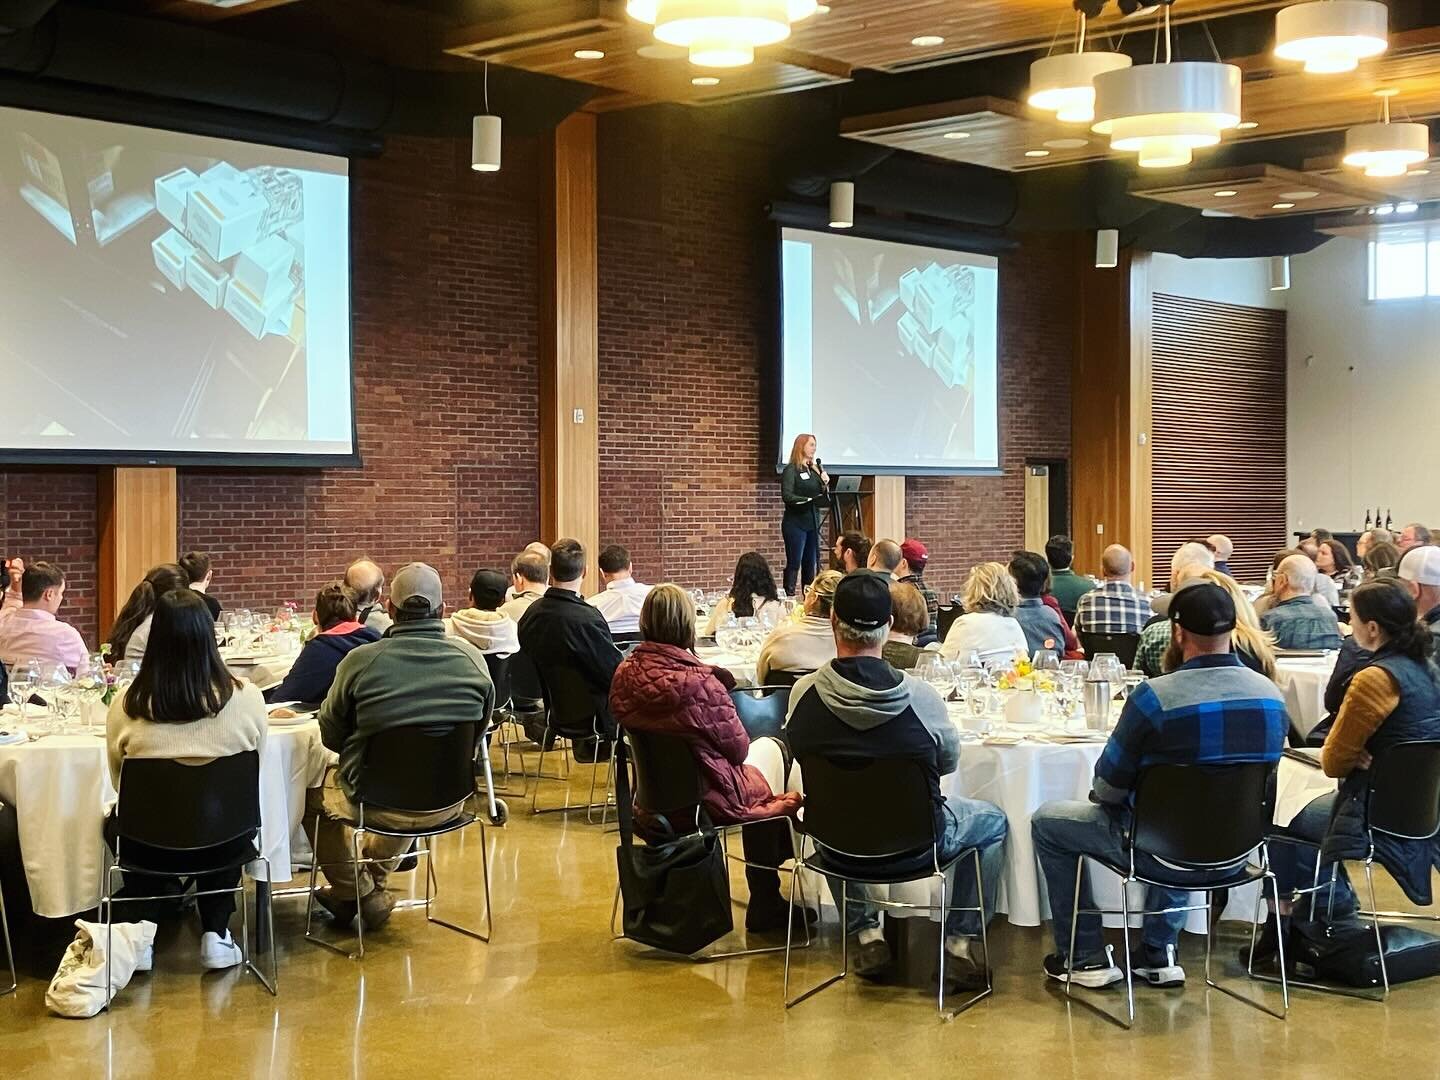 At the LIVE Annual Meeting today🍷, one of the lovely wine non-profit orgs we work with. We&rsquo;re happy to support the team for a 4th year. #eventprofs #oregonwine #organicwine